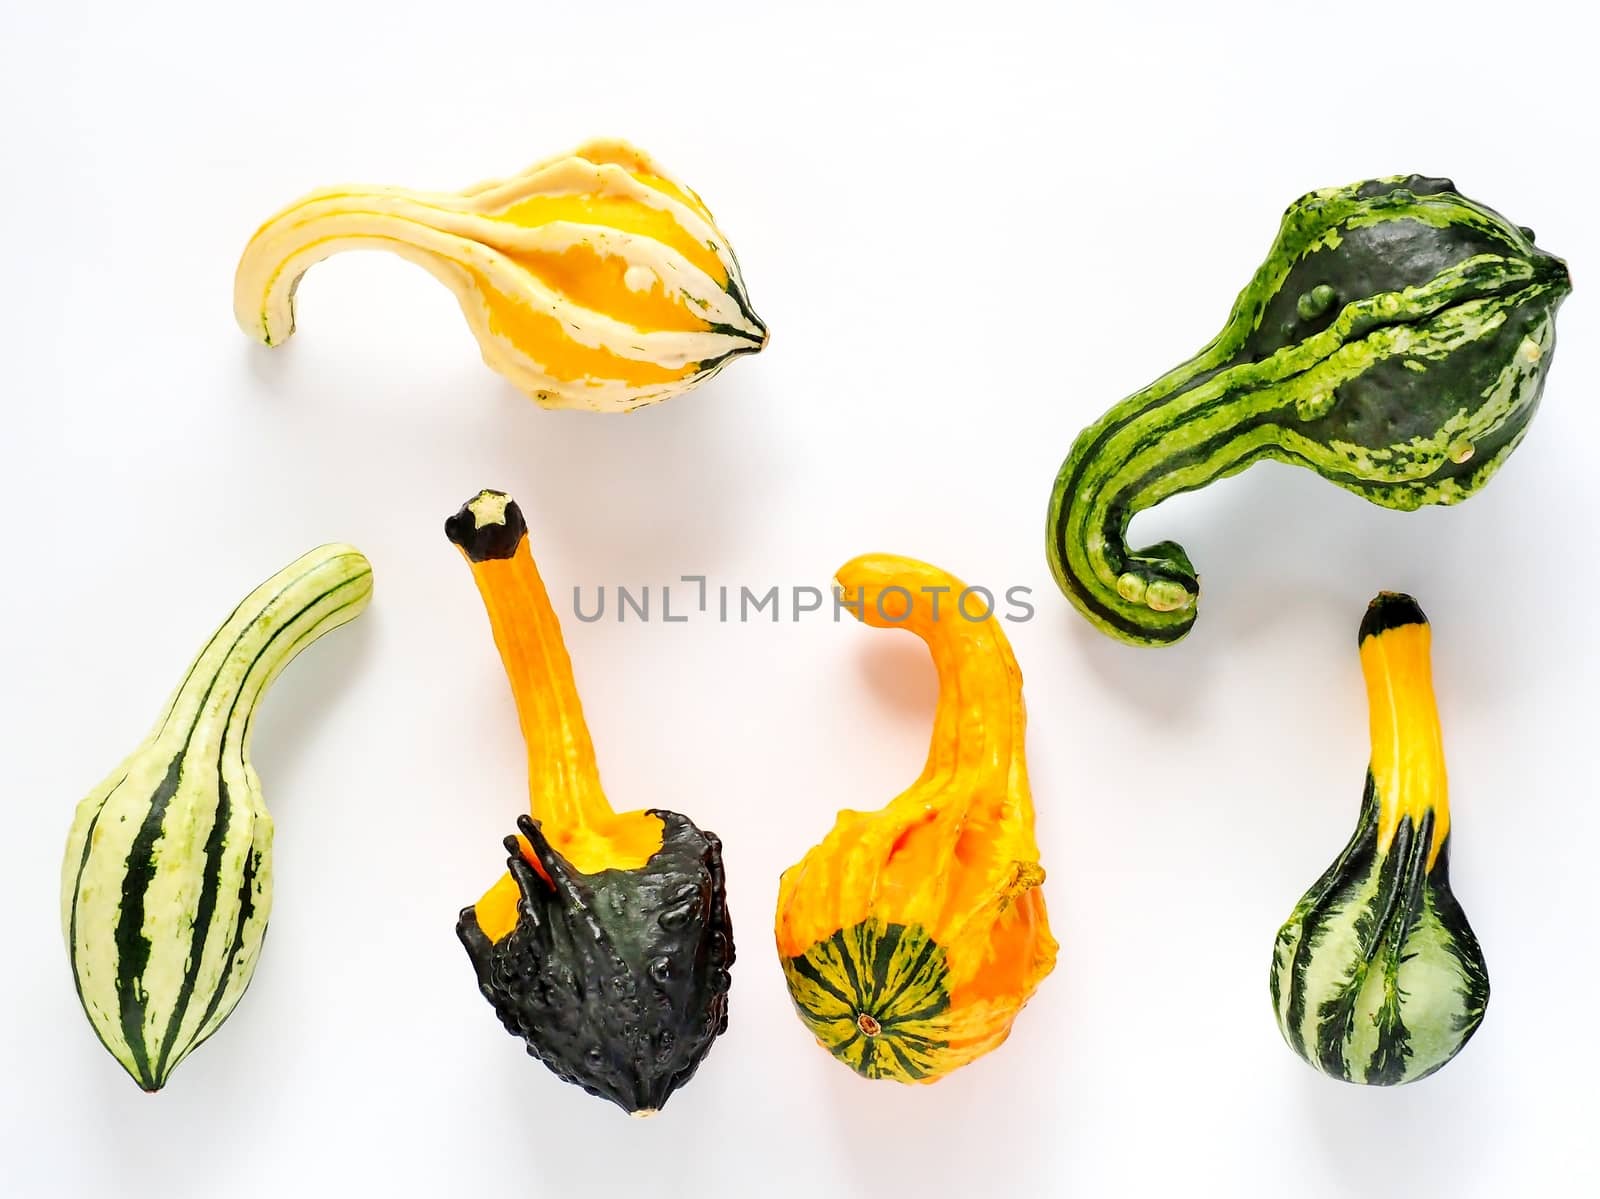 Six decorative pumpkins on the white background.